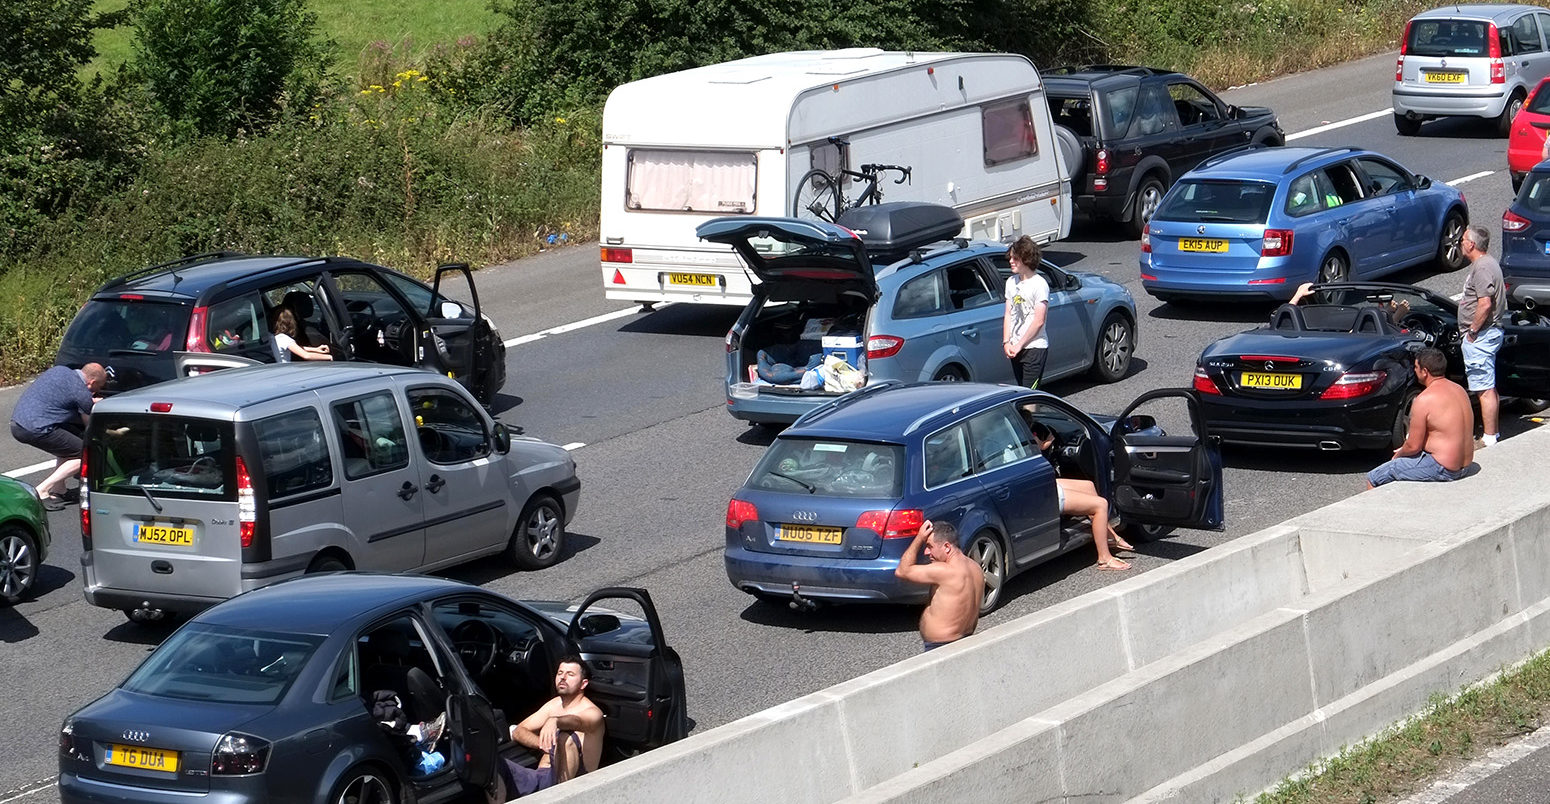 People stuck in a traffic jam in Somerset, UK, leave their cars during a heatwave on 30 July 2016. Credit: Timothy Large / Alamy Stock Photo. GFAT52